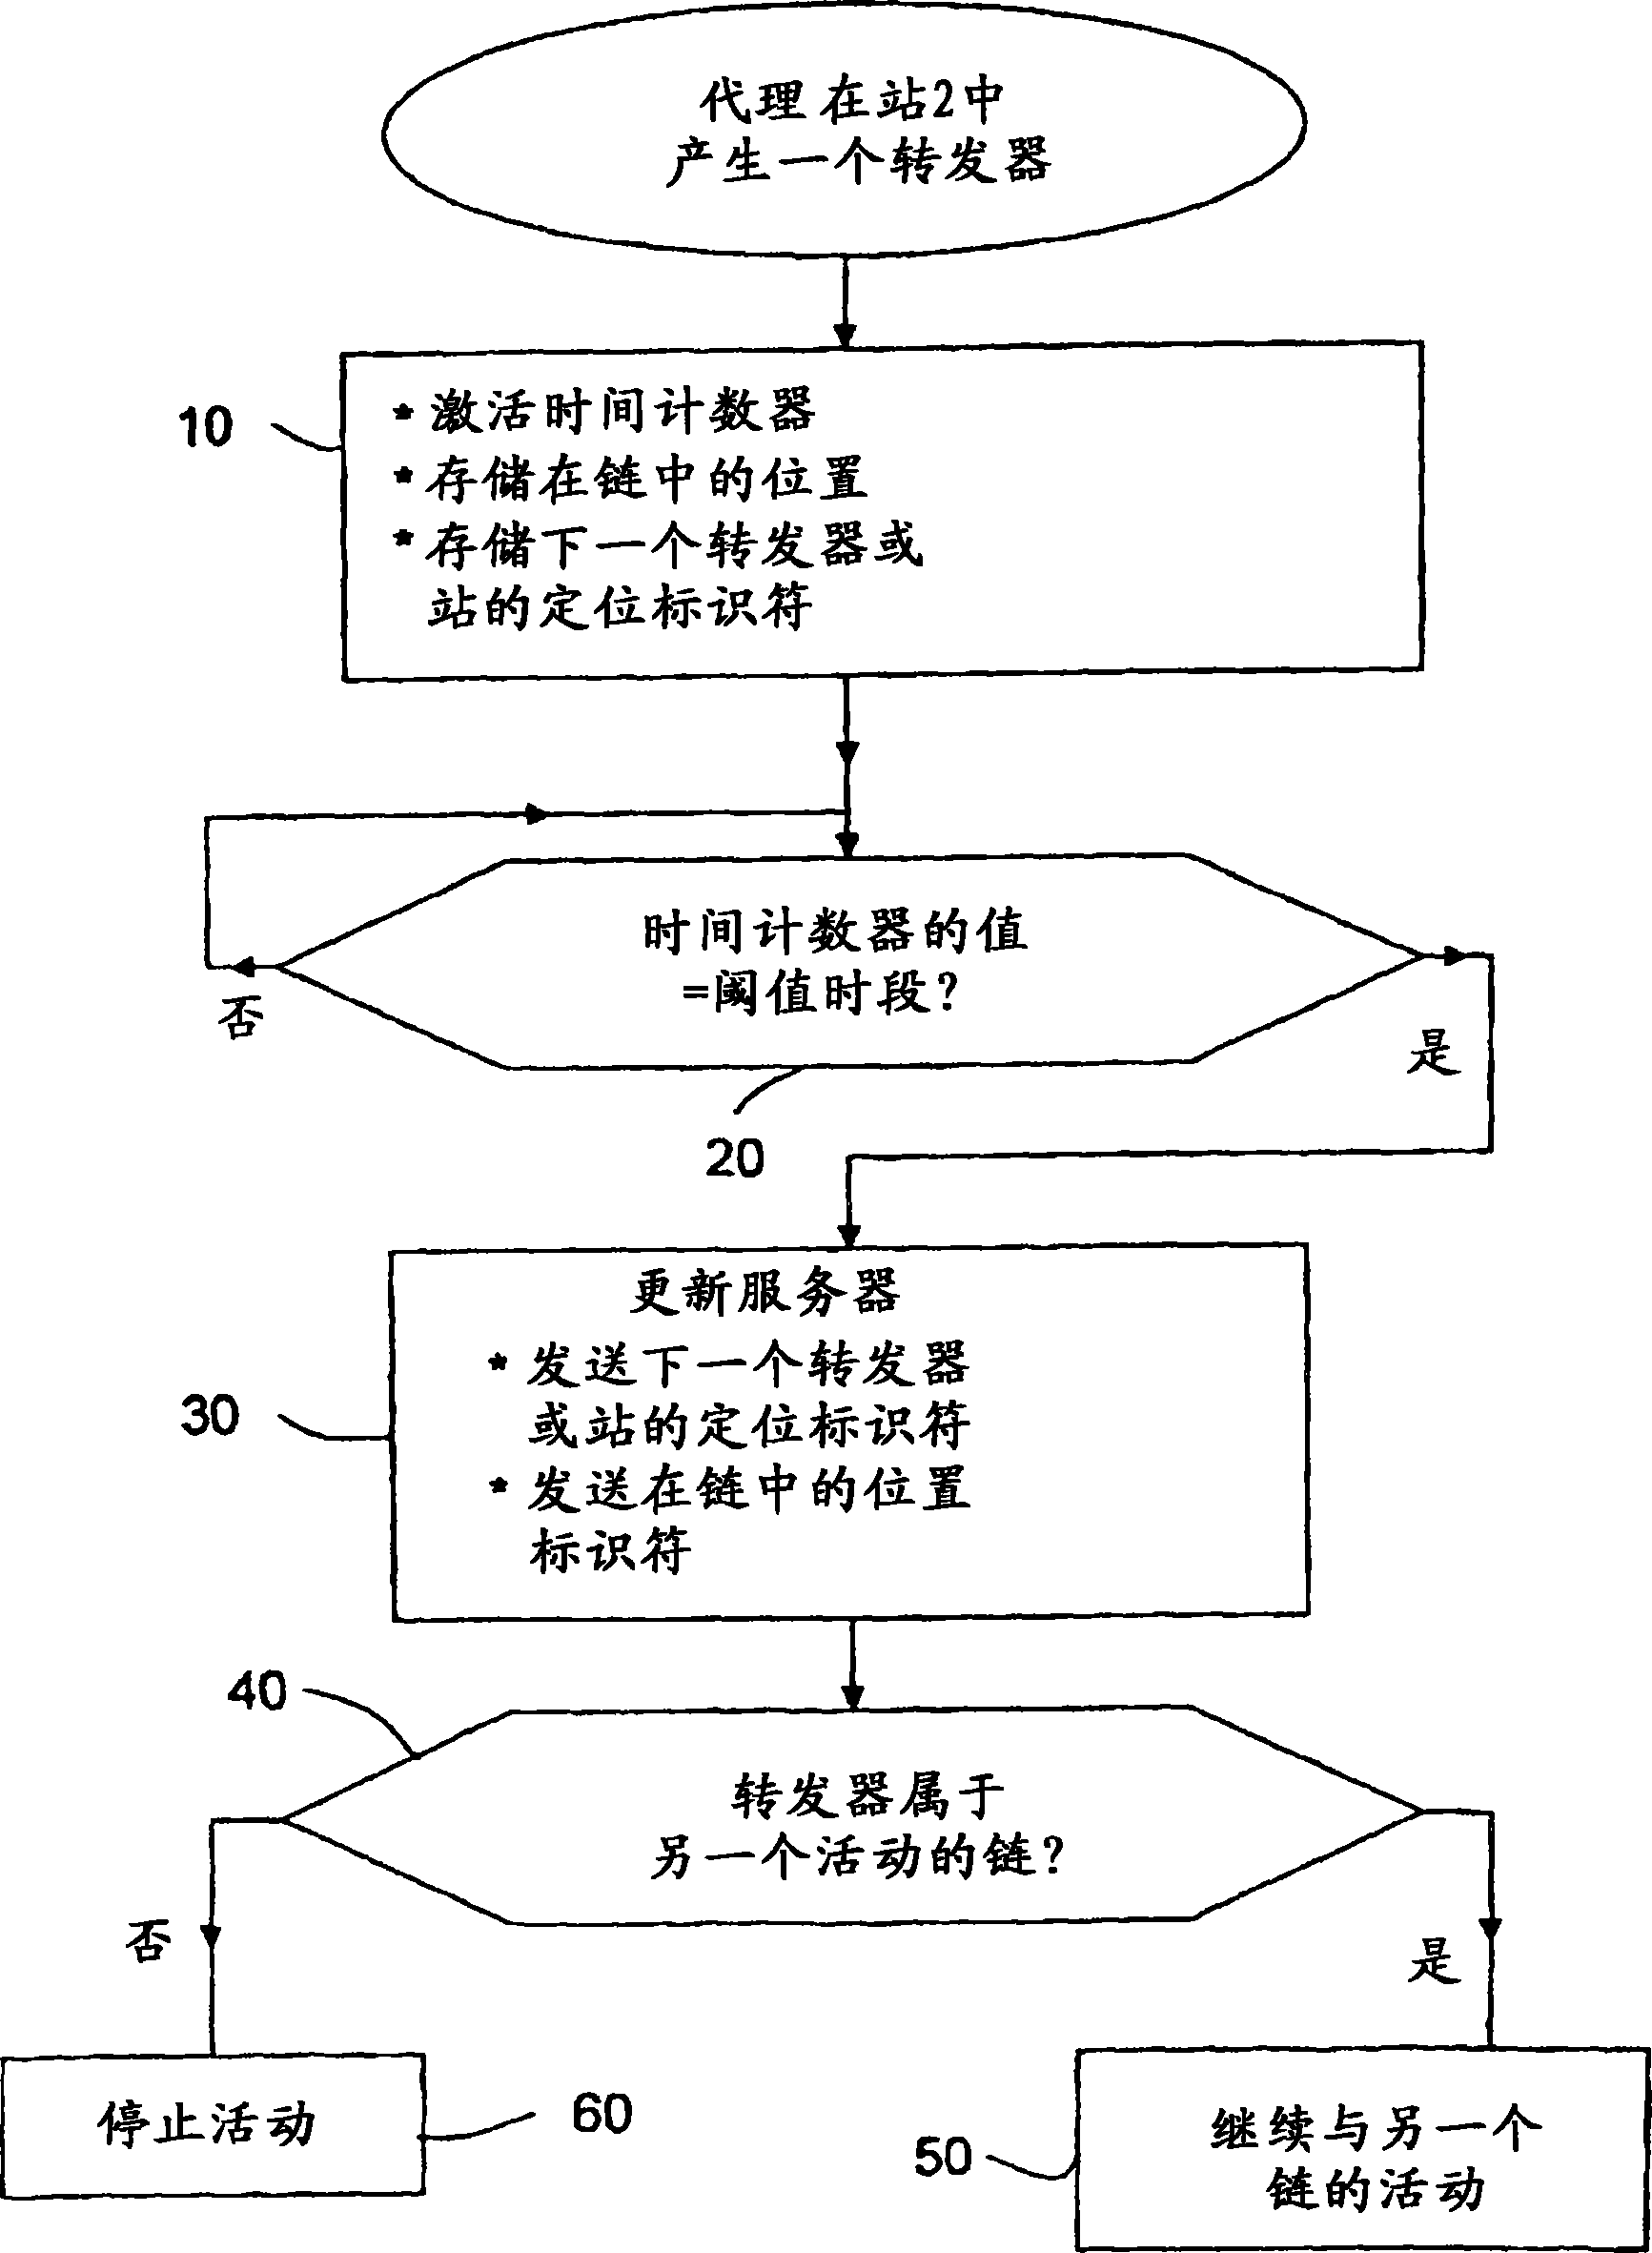 Method of locating mobile communicating objects within a communications network, comprising the transmission of location identifiers by repeaters and server updates